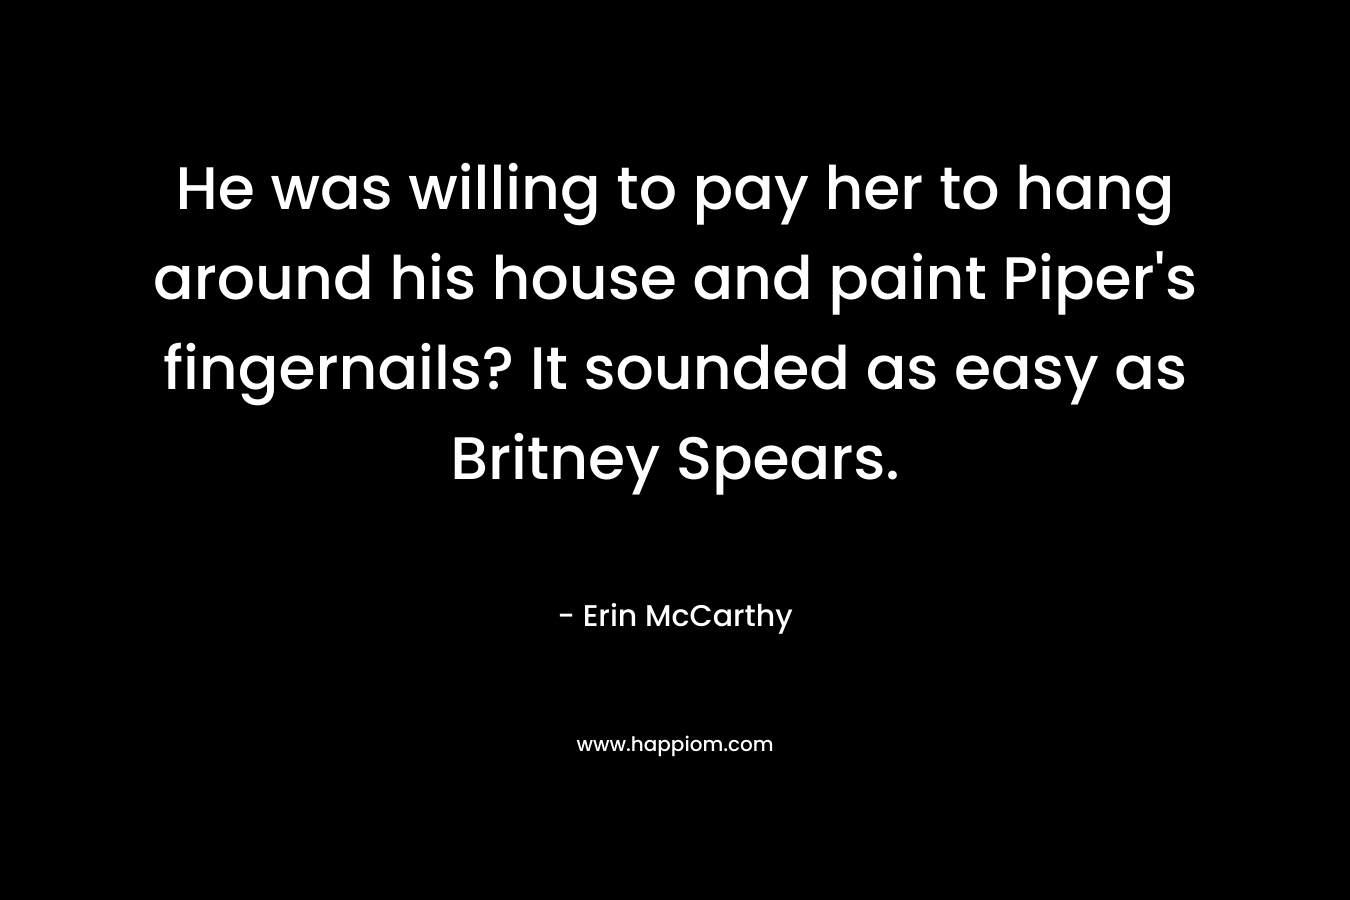 He was willing to pay her to hang around his house and paint Piper’s fingernails? It sounded as easy as Britney Spears. – Erin McCarthy